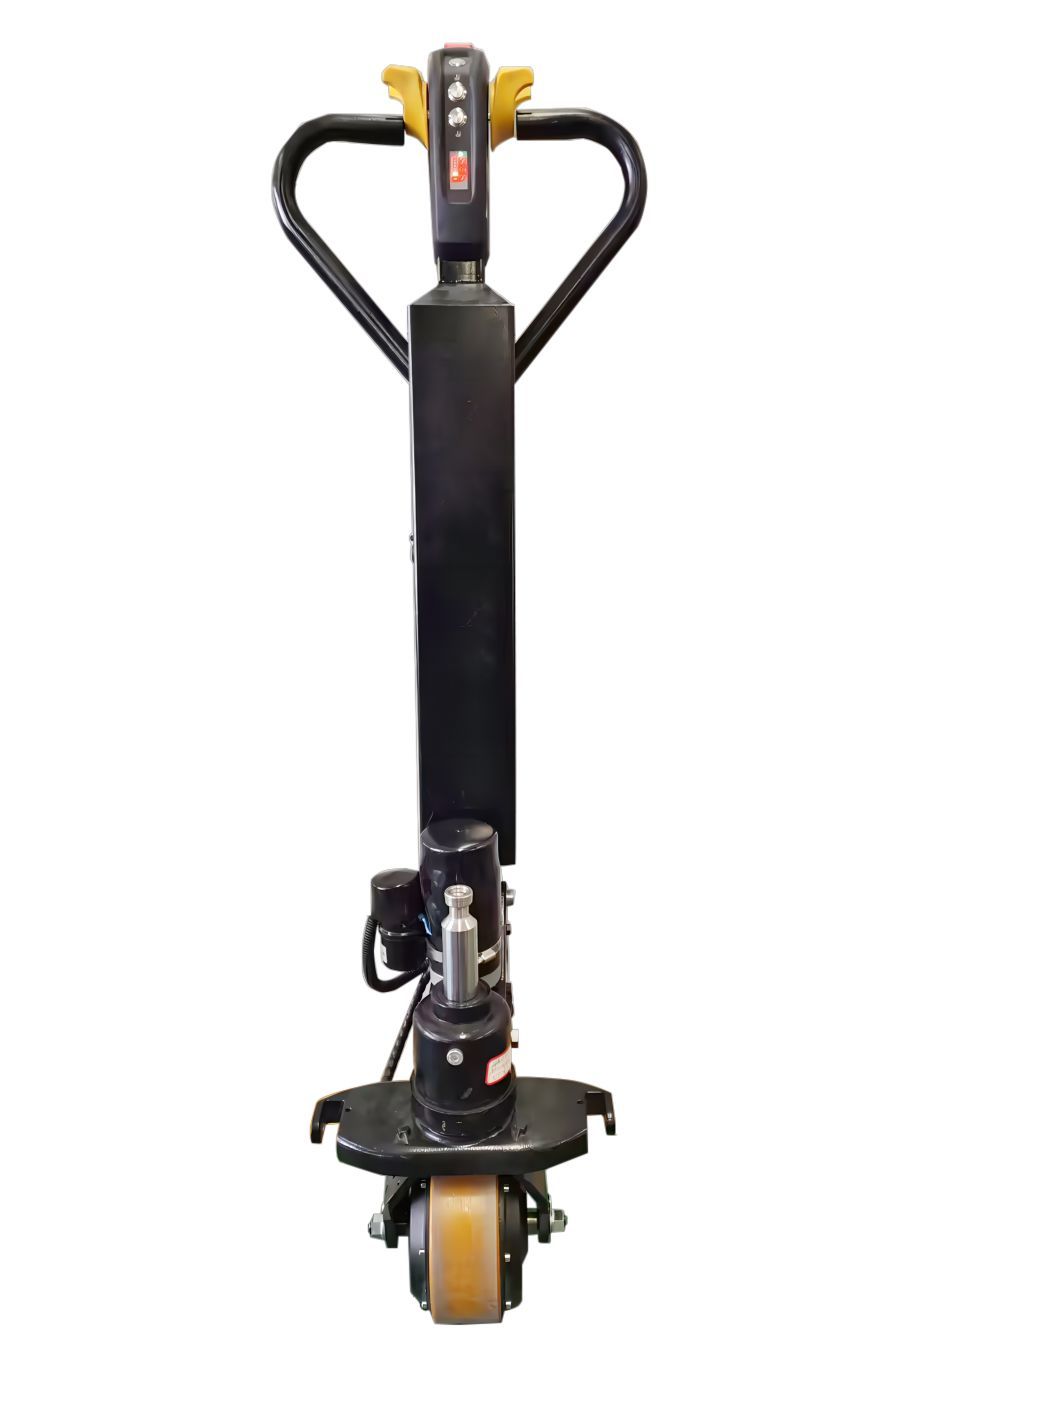 Self-Propelled Full Electric Handle Kit for Modify Manual Pallet Trucks and Pallet Scales to Electric Moving and Lifting